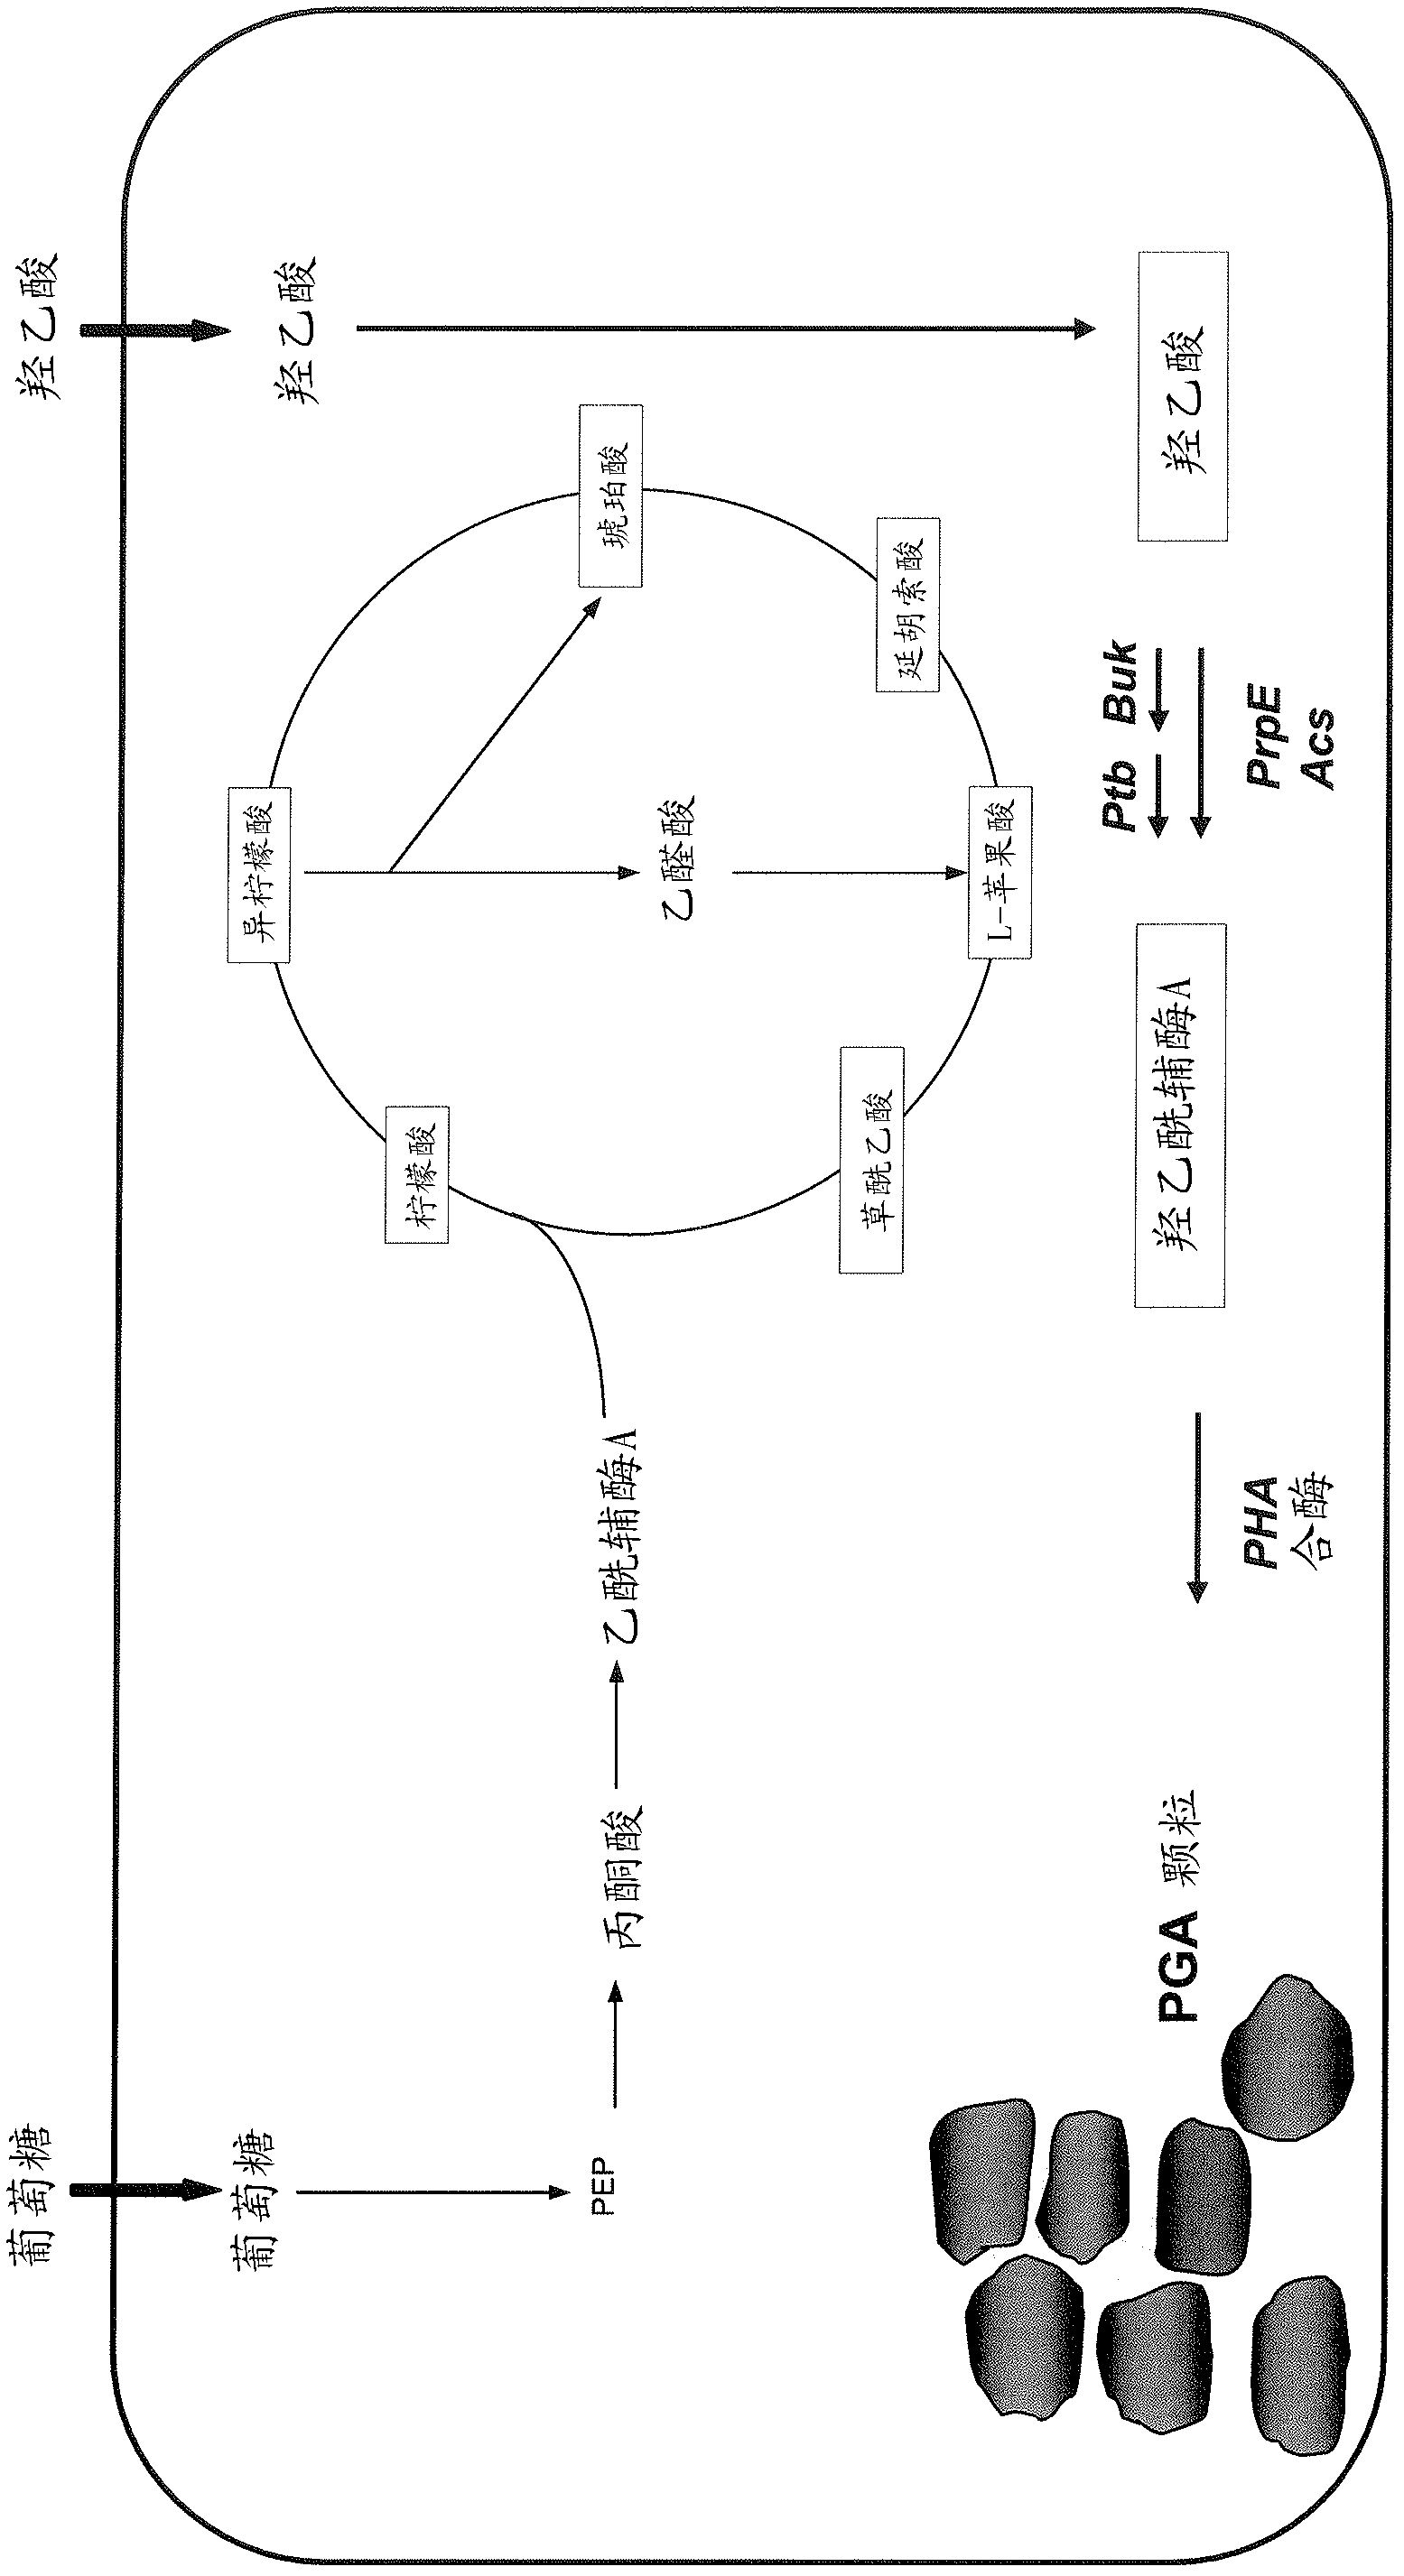 Method for polymerising glycolic acid with microorganisms